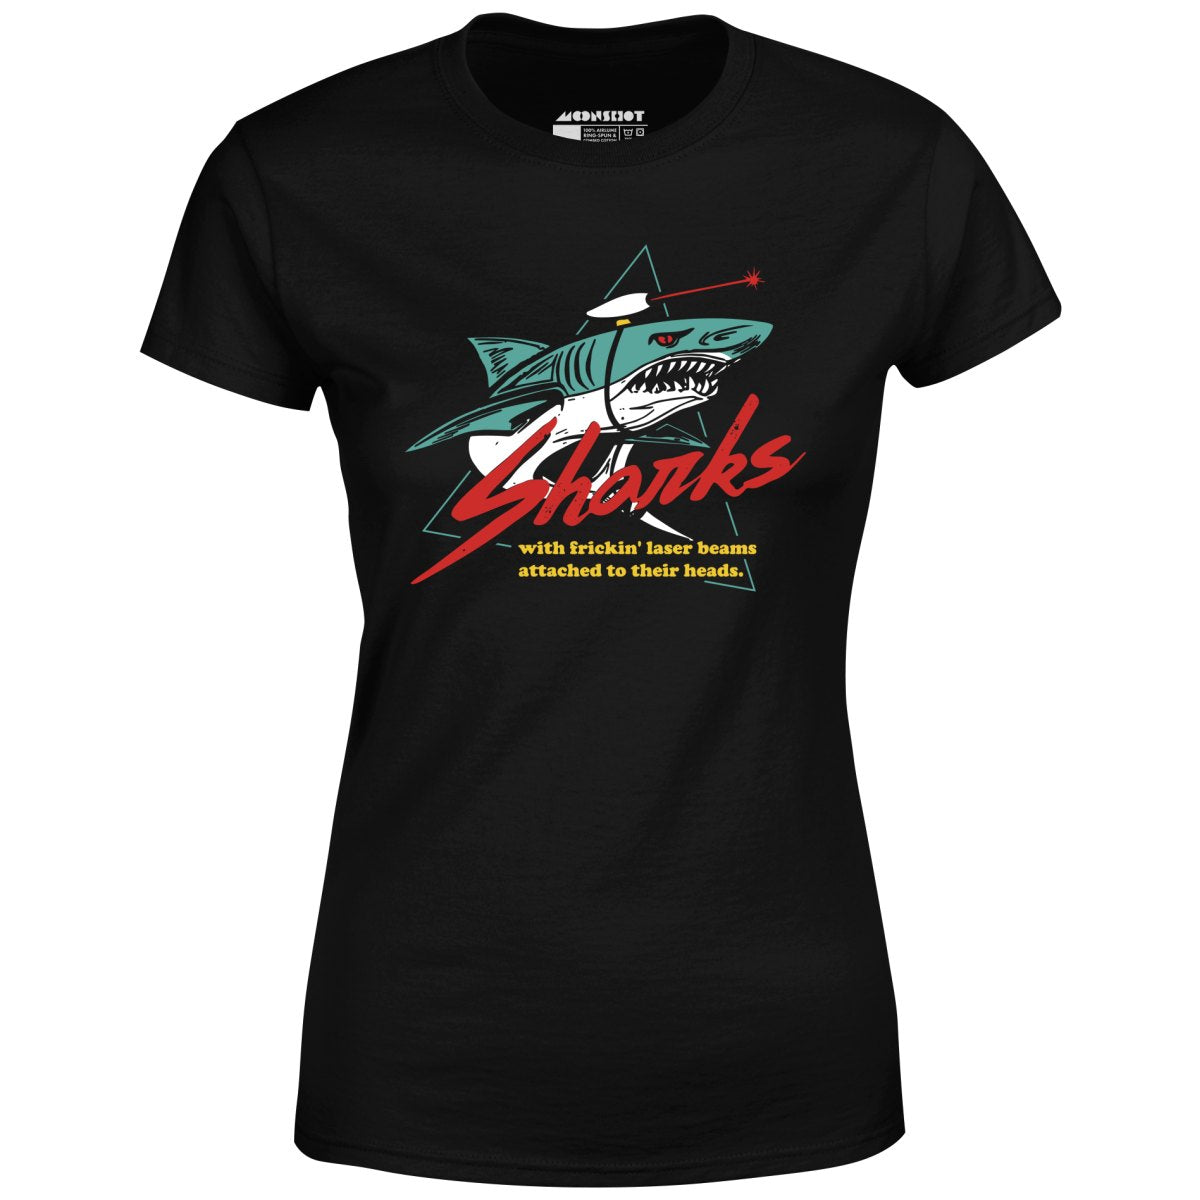 Sharks With Frickin' Laser Beams Attached to Their Heads - Women's T-Shirt